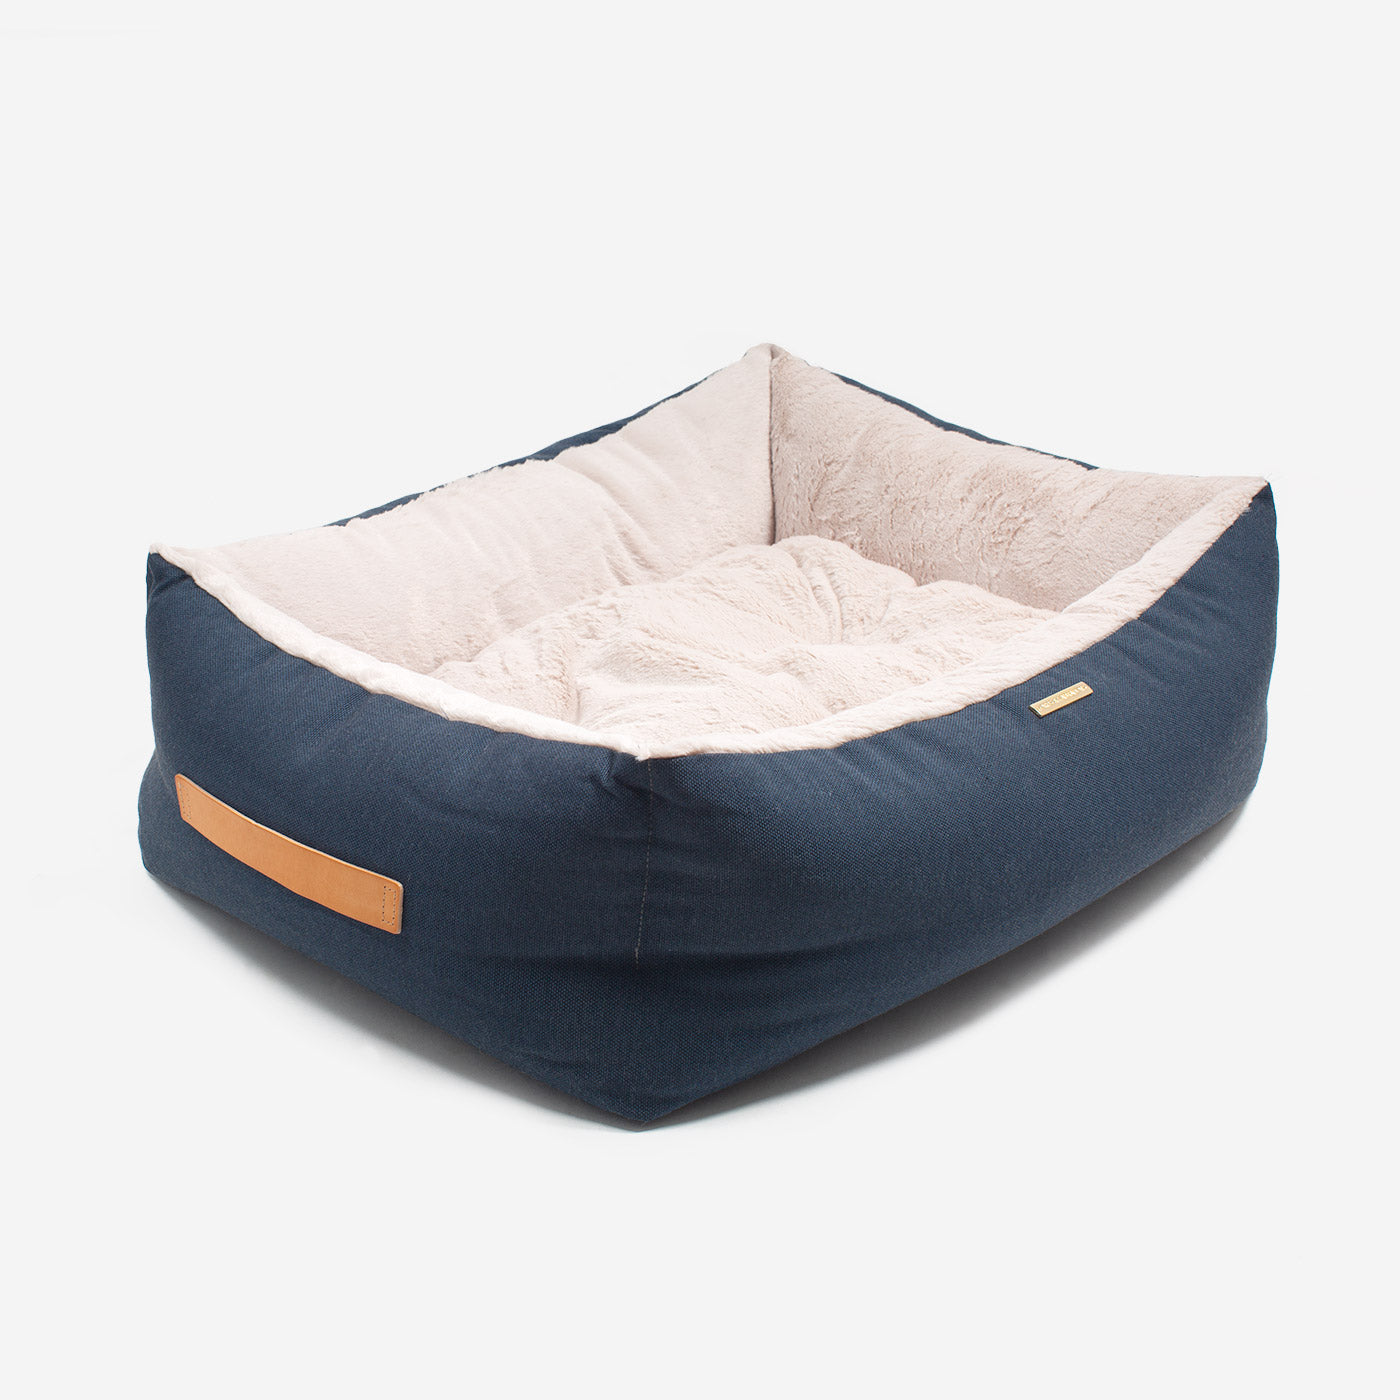 Discover This Luxurious Box Bed For Dogs, Made Using Beautiful Twill Fabric To Craft The Perfect Dog Box Bed! In Stunning Navy Denim, Available Now at Lords & Labradors US